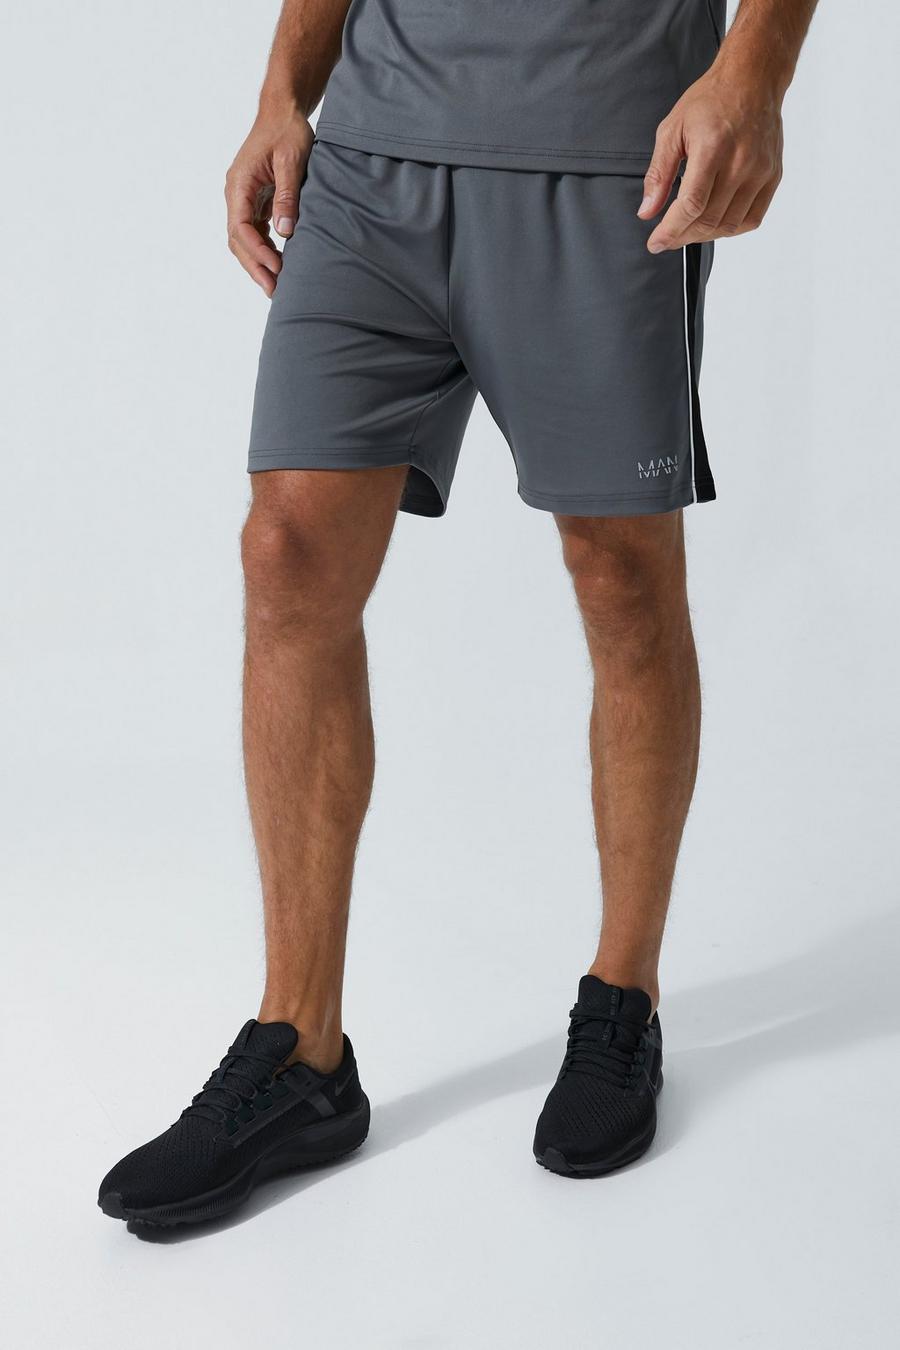 Charcoal Tall Man Active Performance Training Shorts image number 1